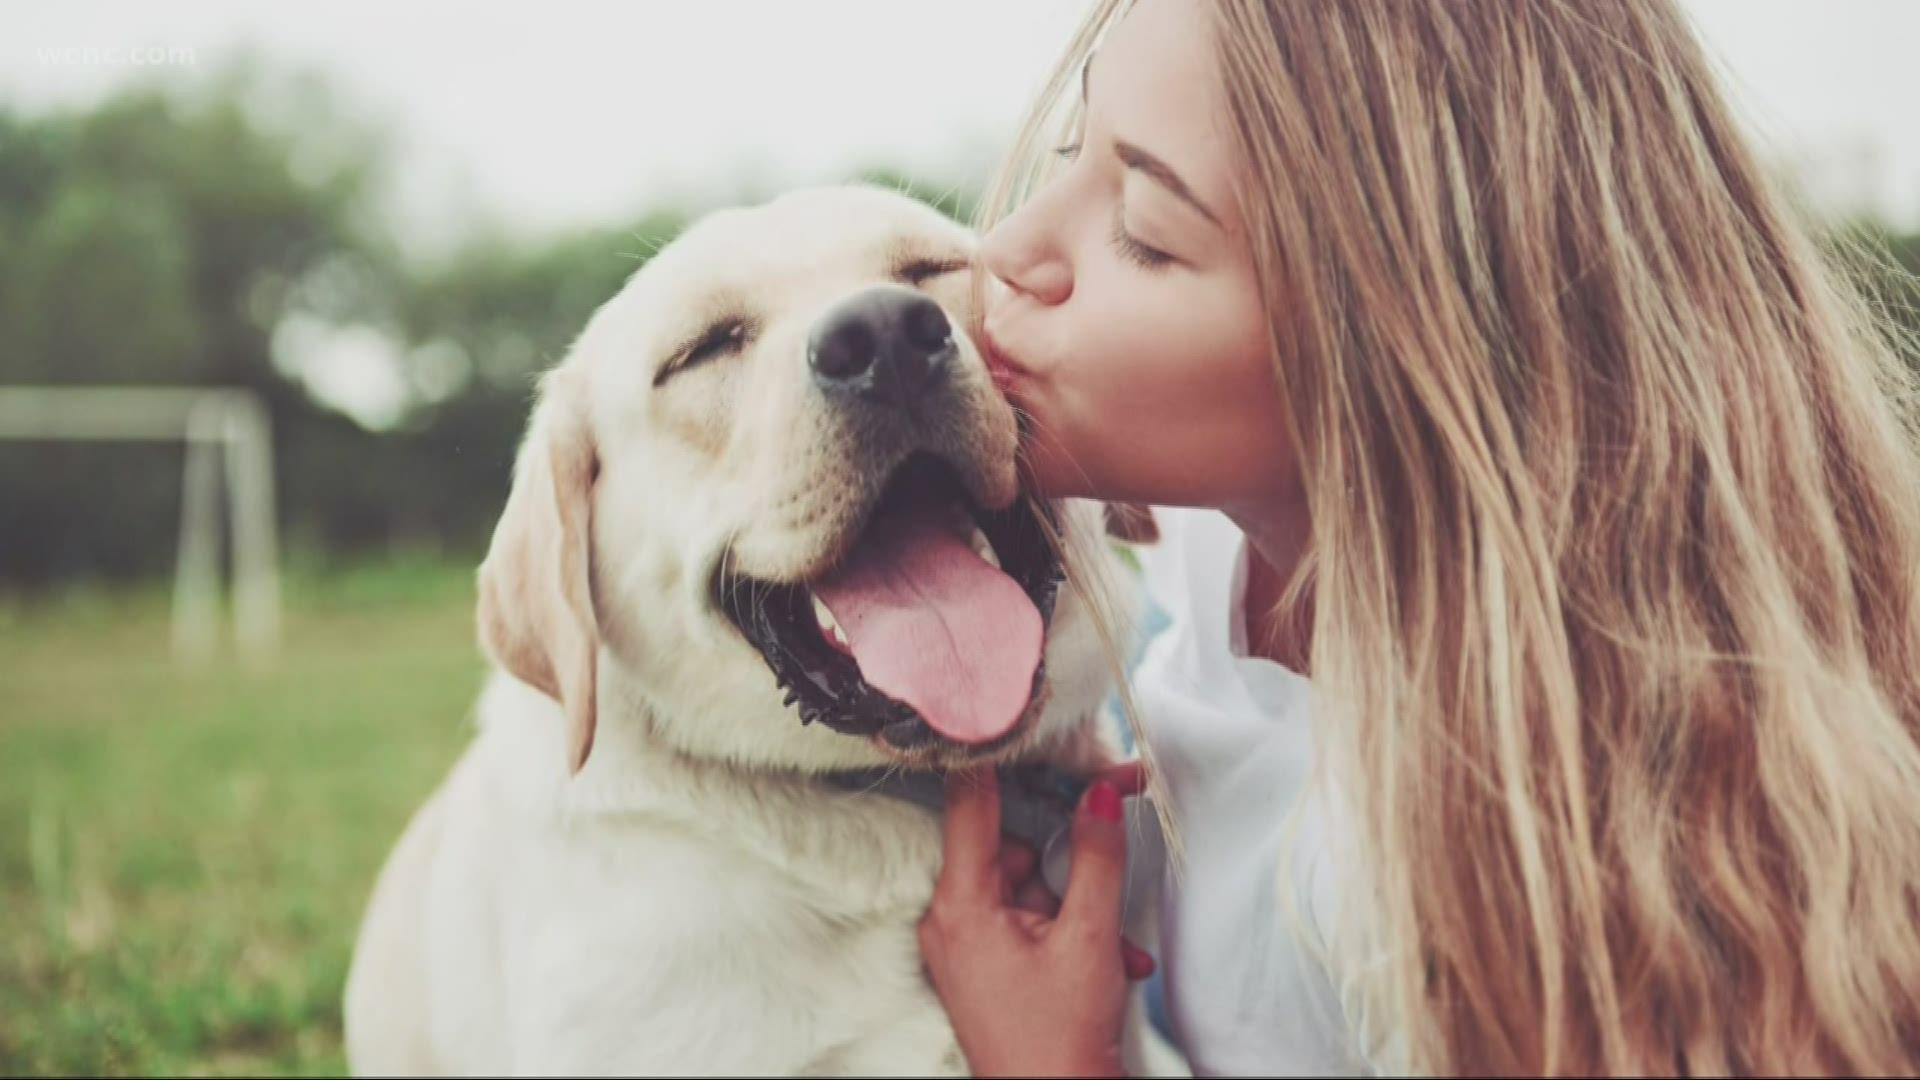 A new survey showed that 40% of dating app users have matched with someone just because they wanted to meet their dog.